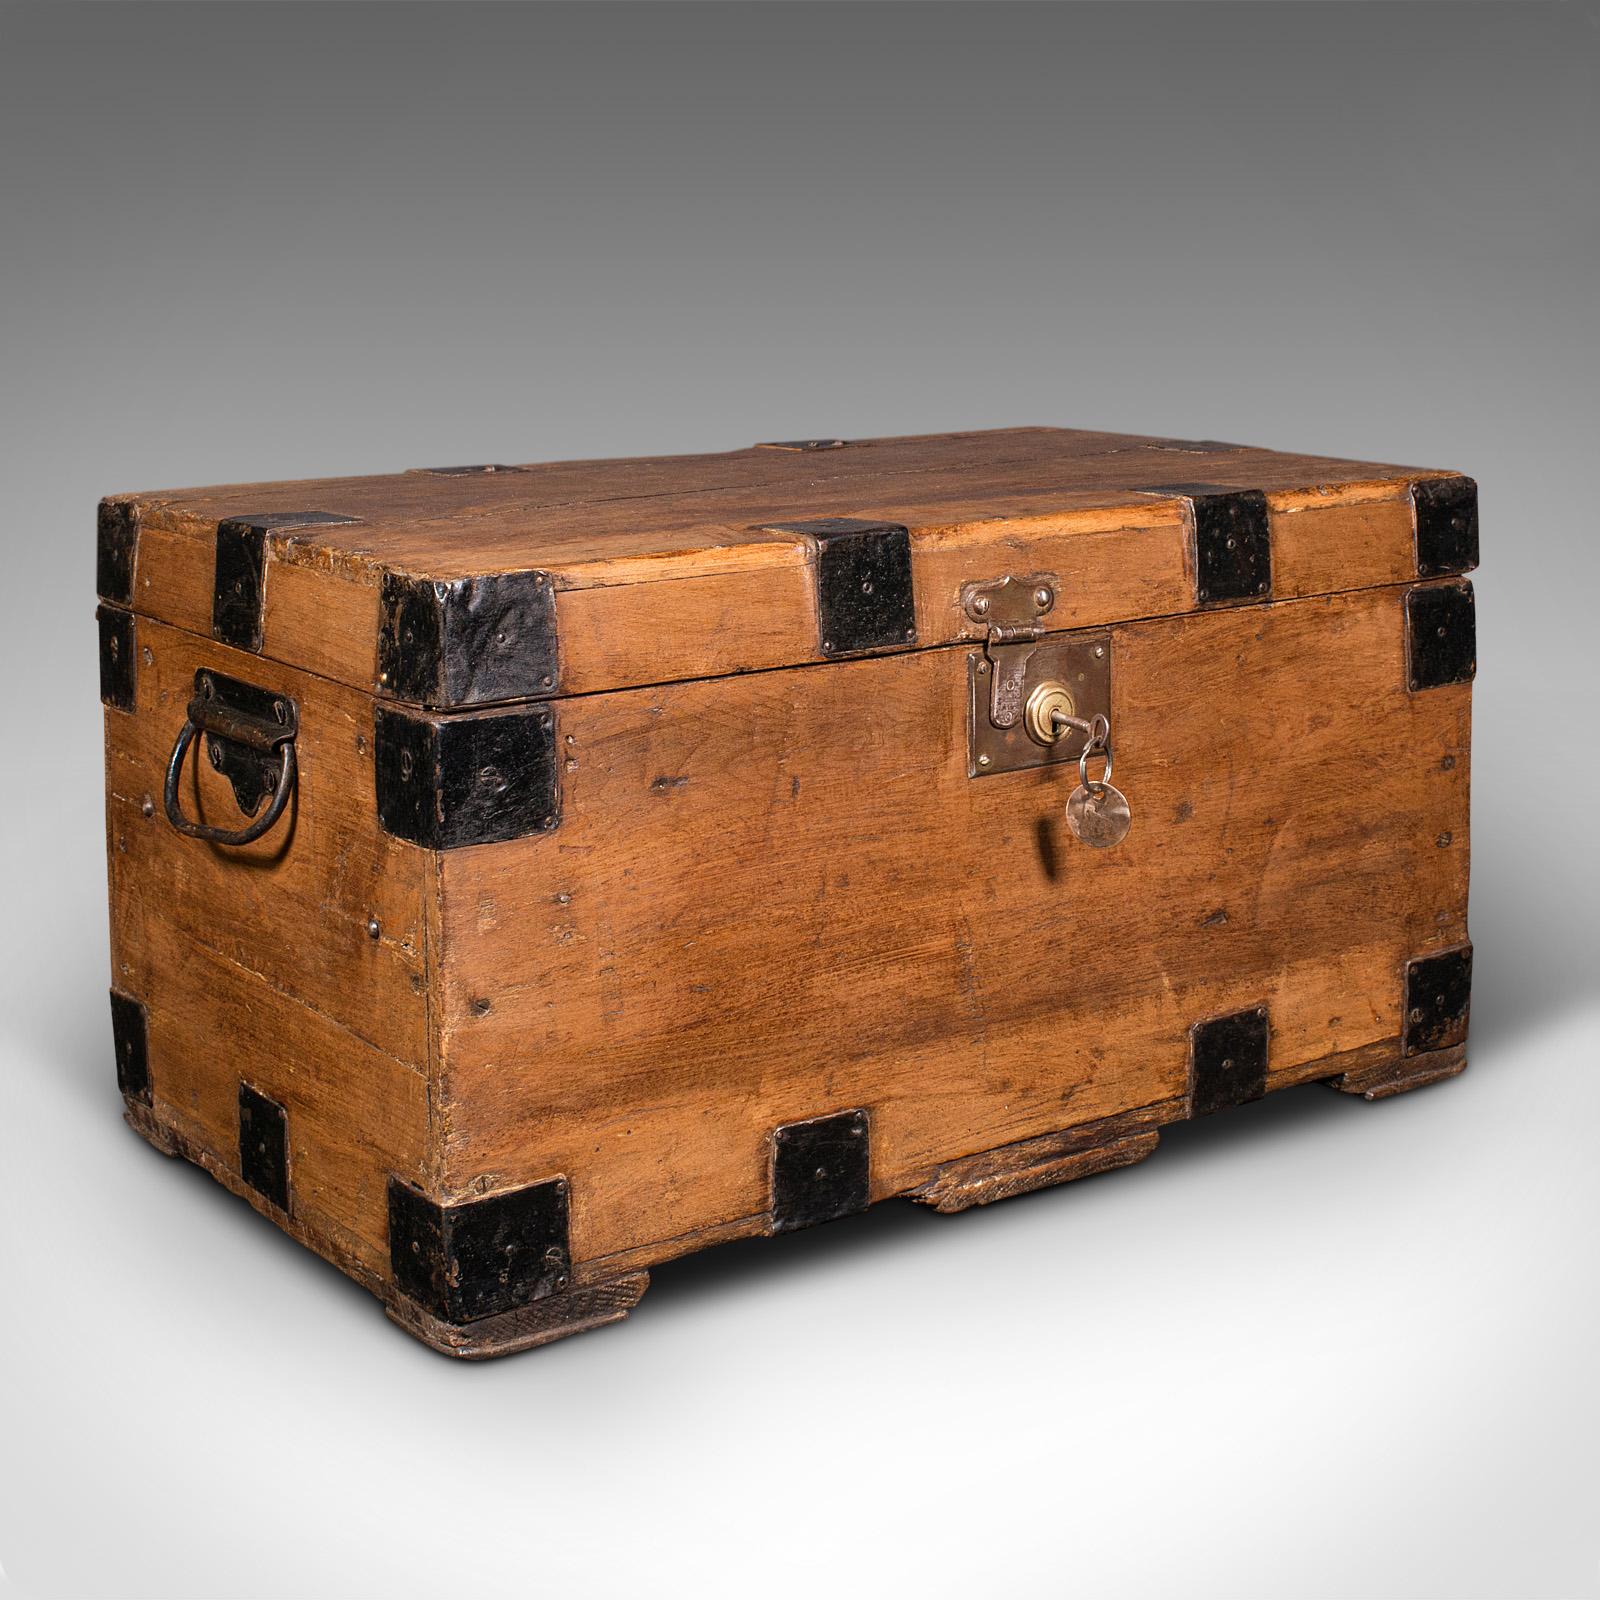 This is an antique carpenter's chest. An English, pine tool trunk, dating to the Victorian period, circa 1870.

Dutiful craftsmen's chest with great colour and weathering
Displays a desirable aged patina and in good original order
Pine stocks